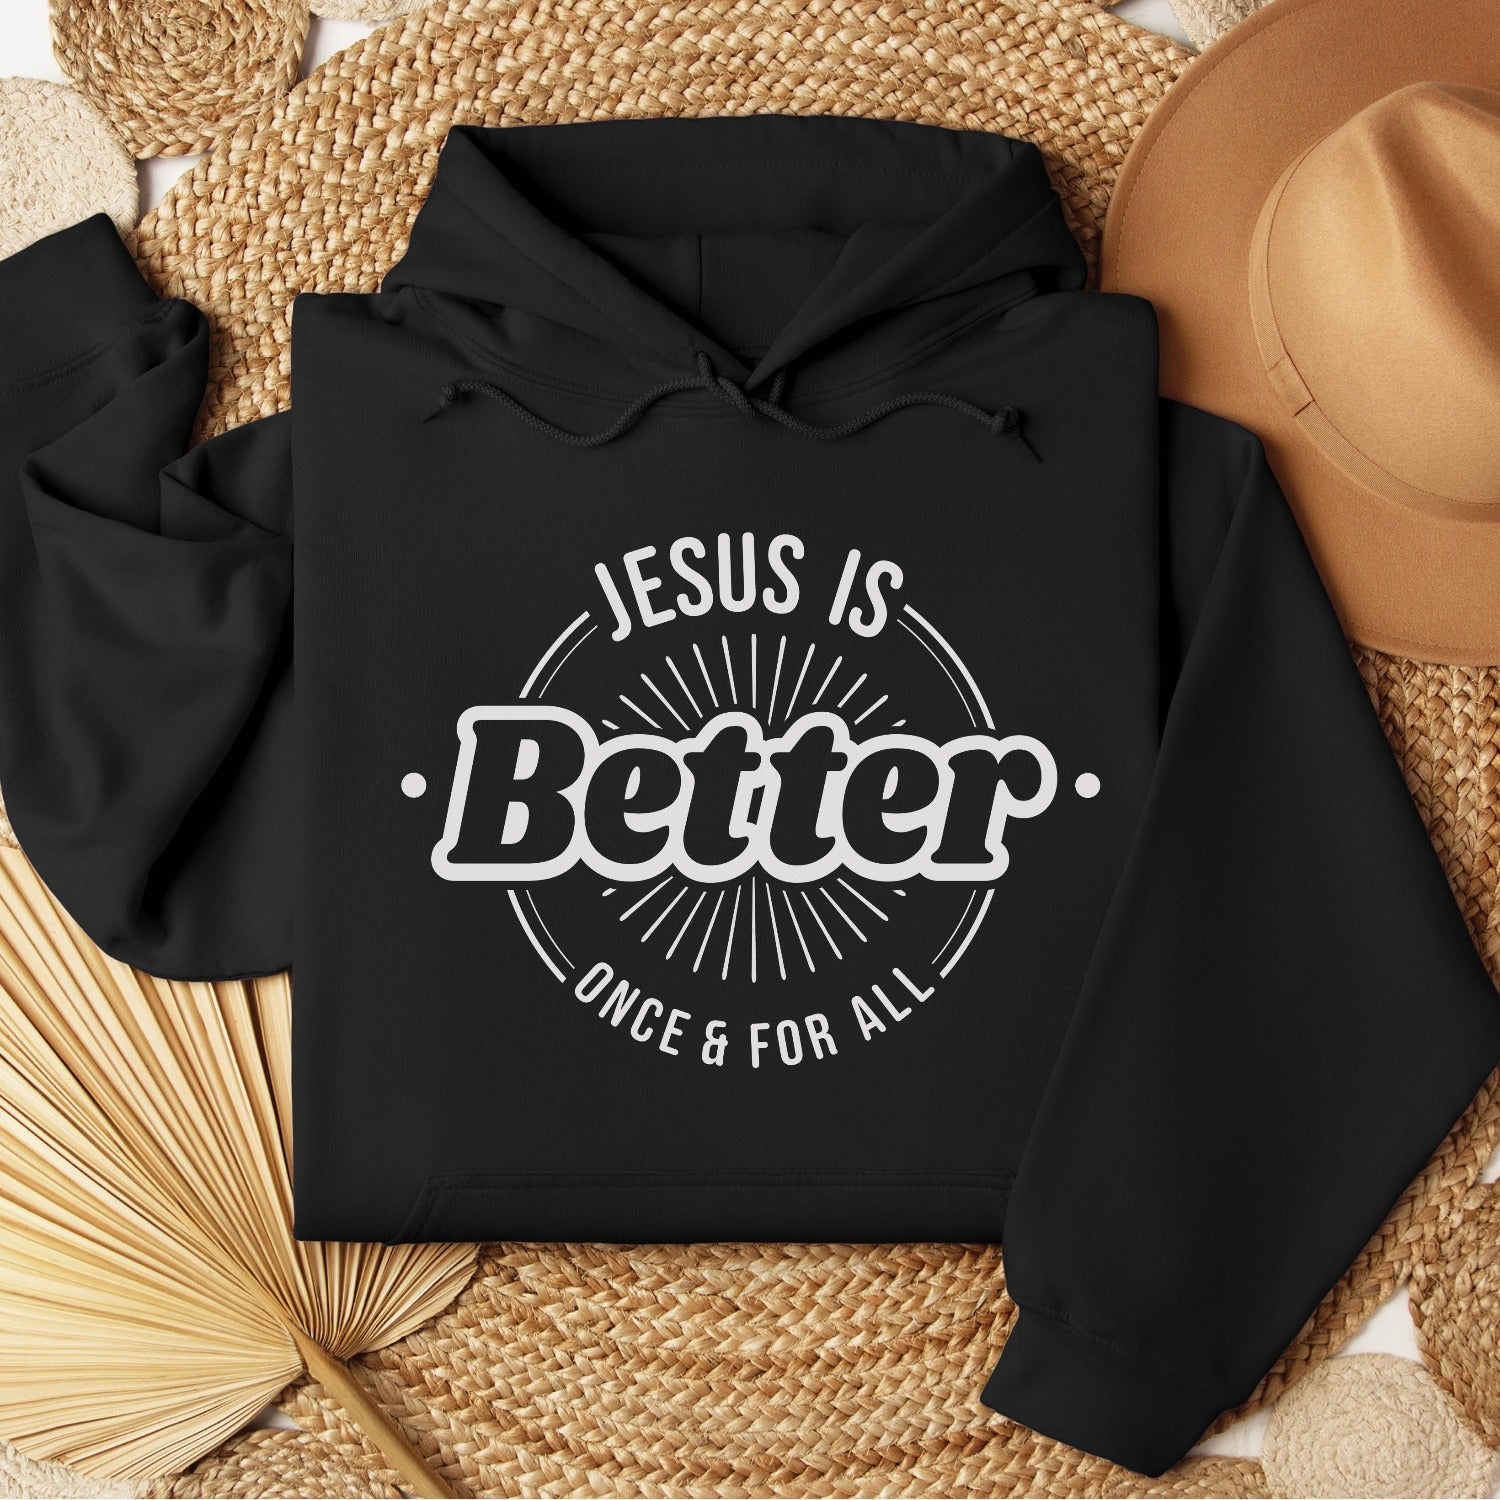 Black color faith-based oversized cozy hoodie with "Jesus is BETTER - Once and For All" logo style design in white, created for Christian men and women